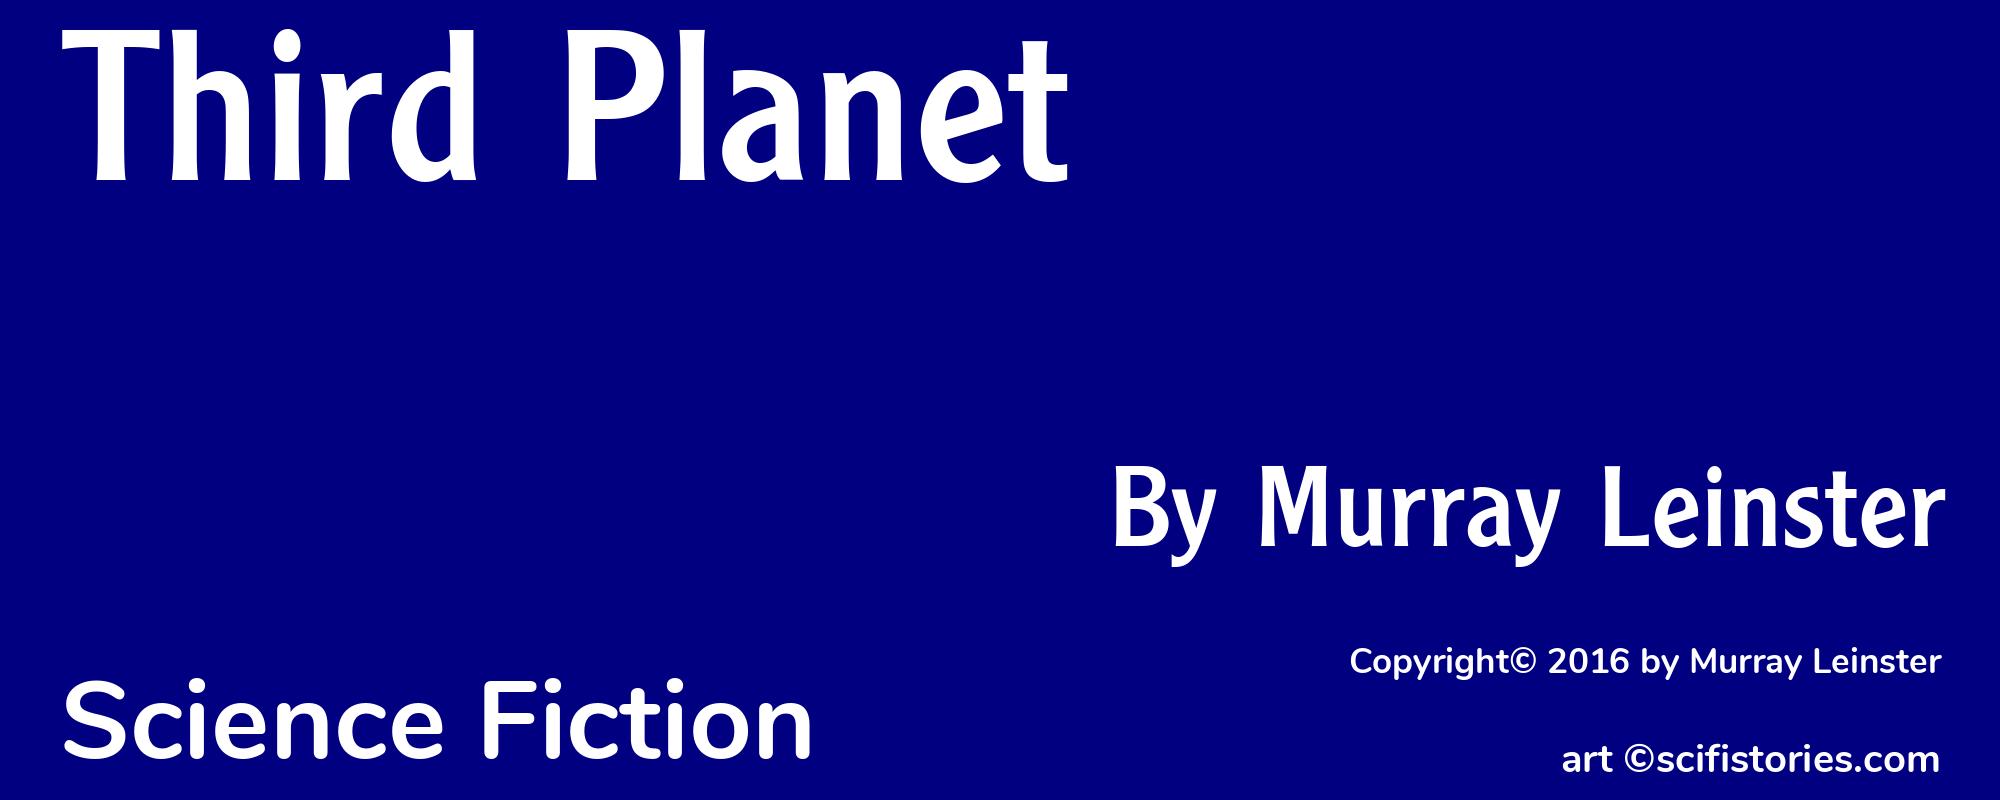 Third Planet - Cover